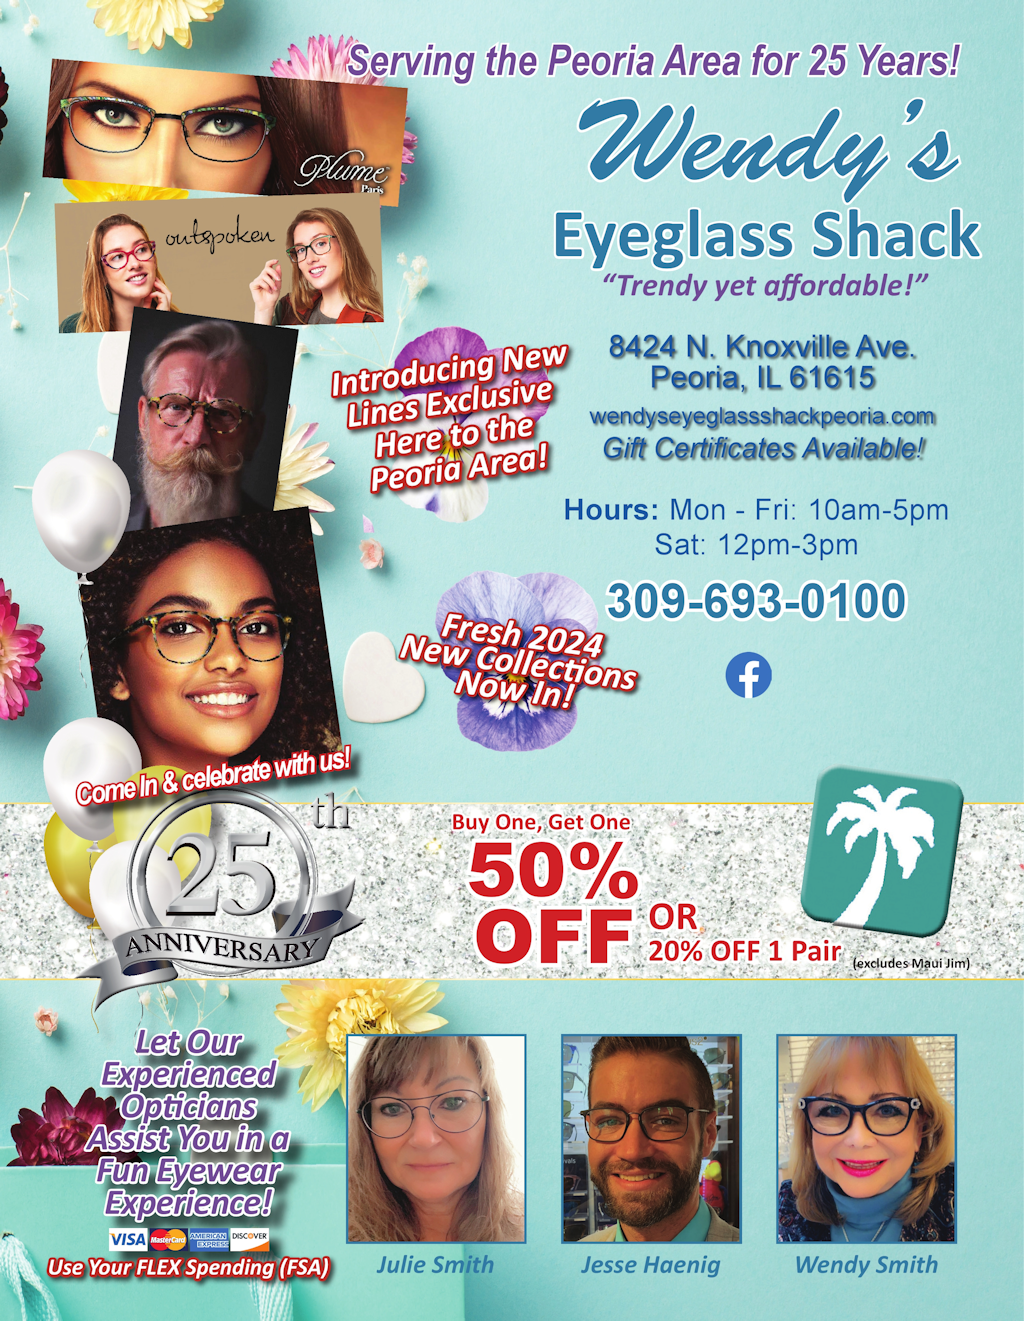 Wendy's Eyeglass Shack eye glasses, sunglasses, repairs, adjustments 20% off coupon Peoria, IL